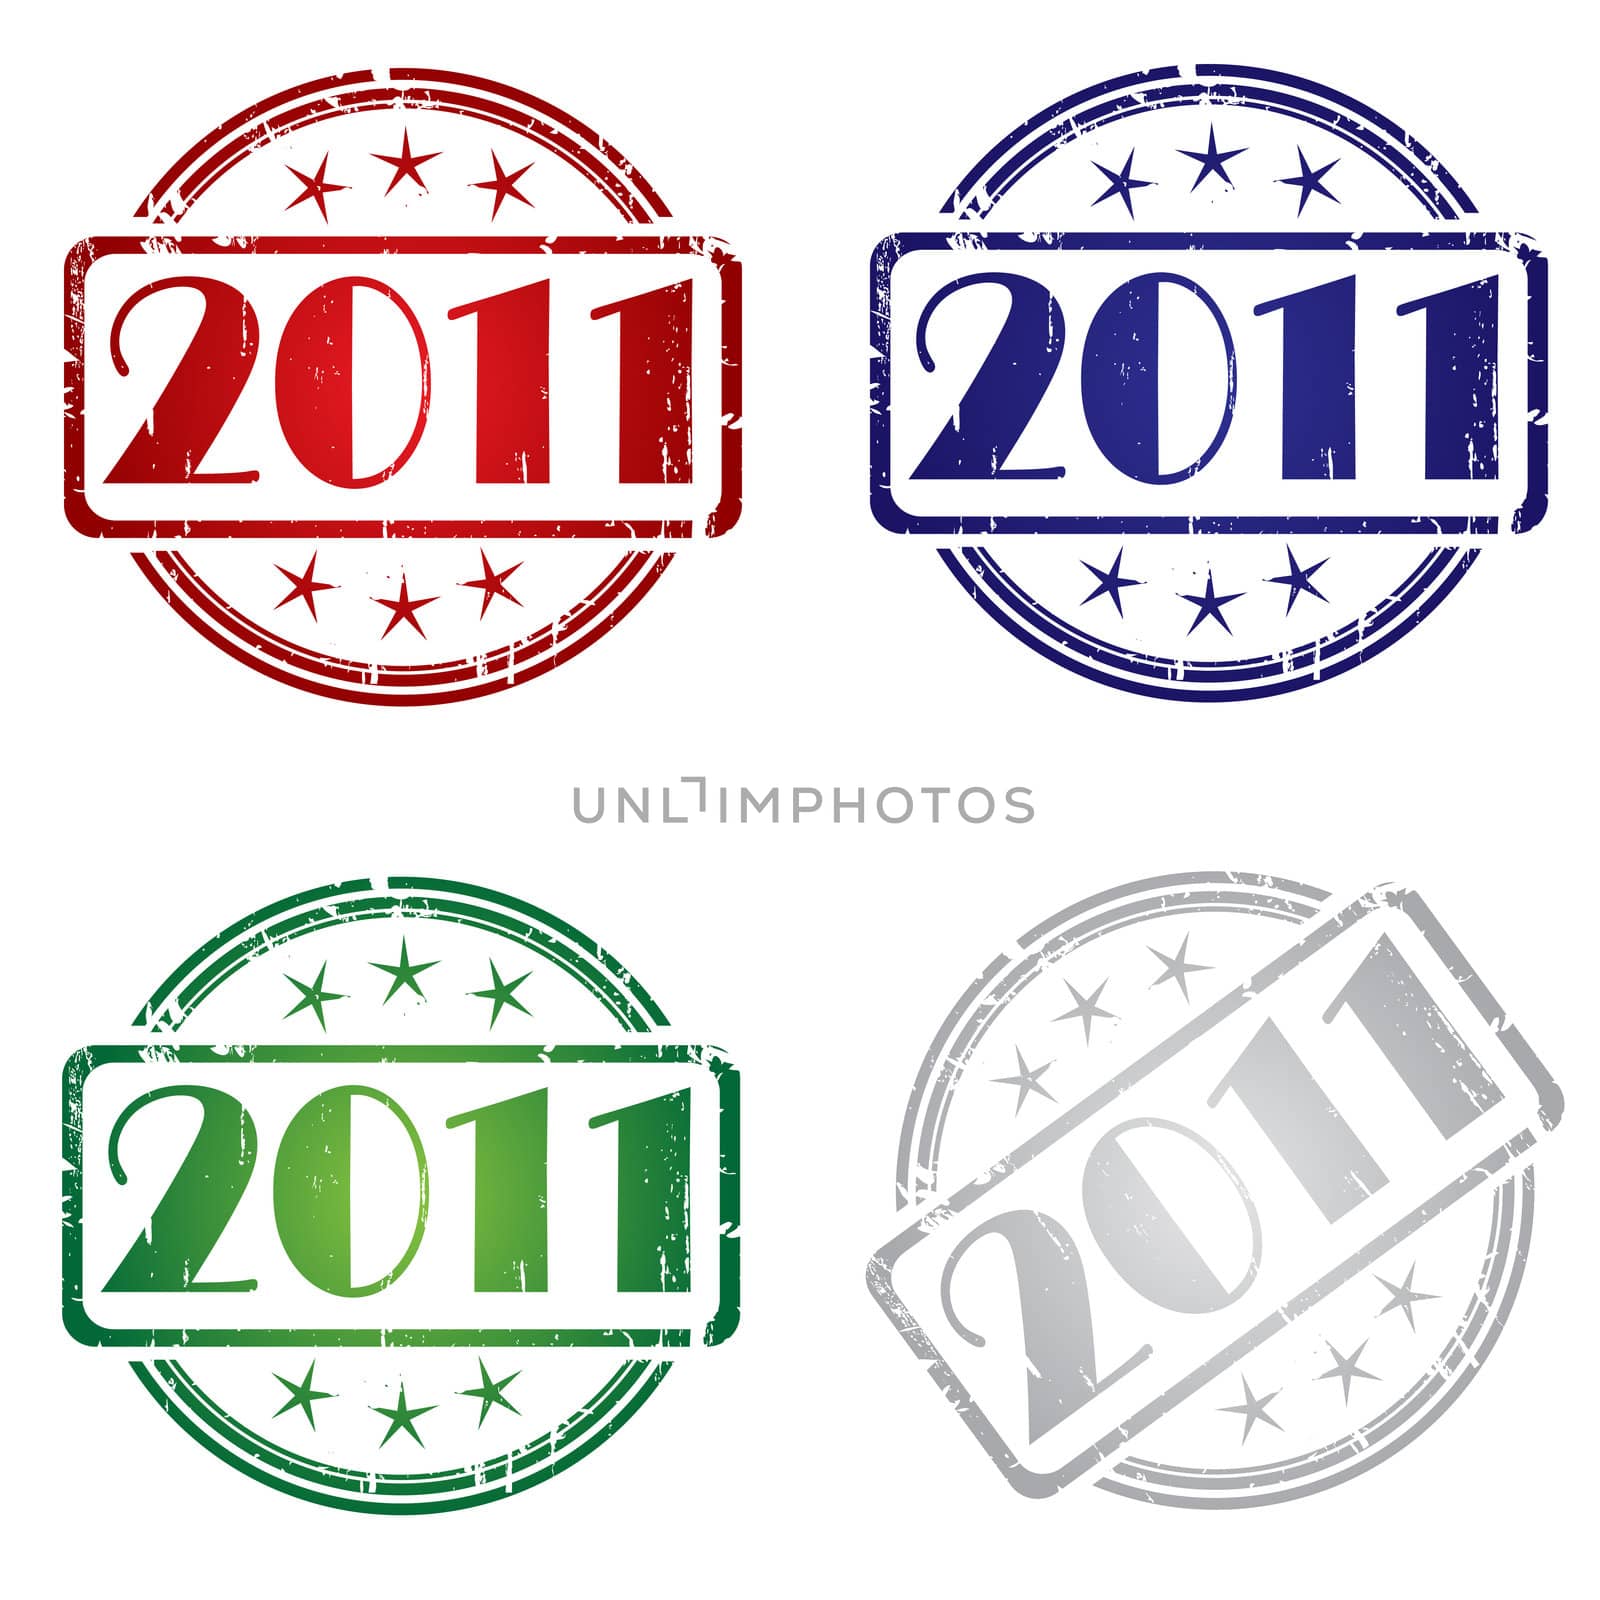 Grunge rubber stamp with 2011 in colors